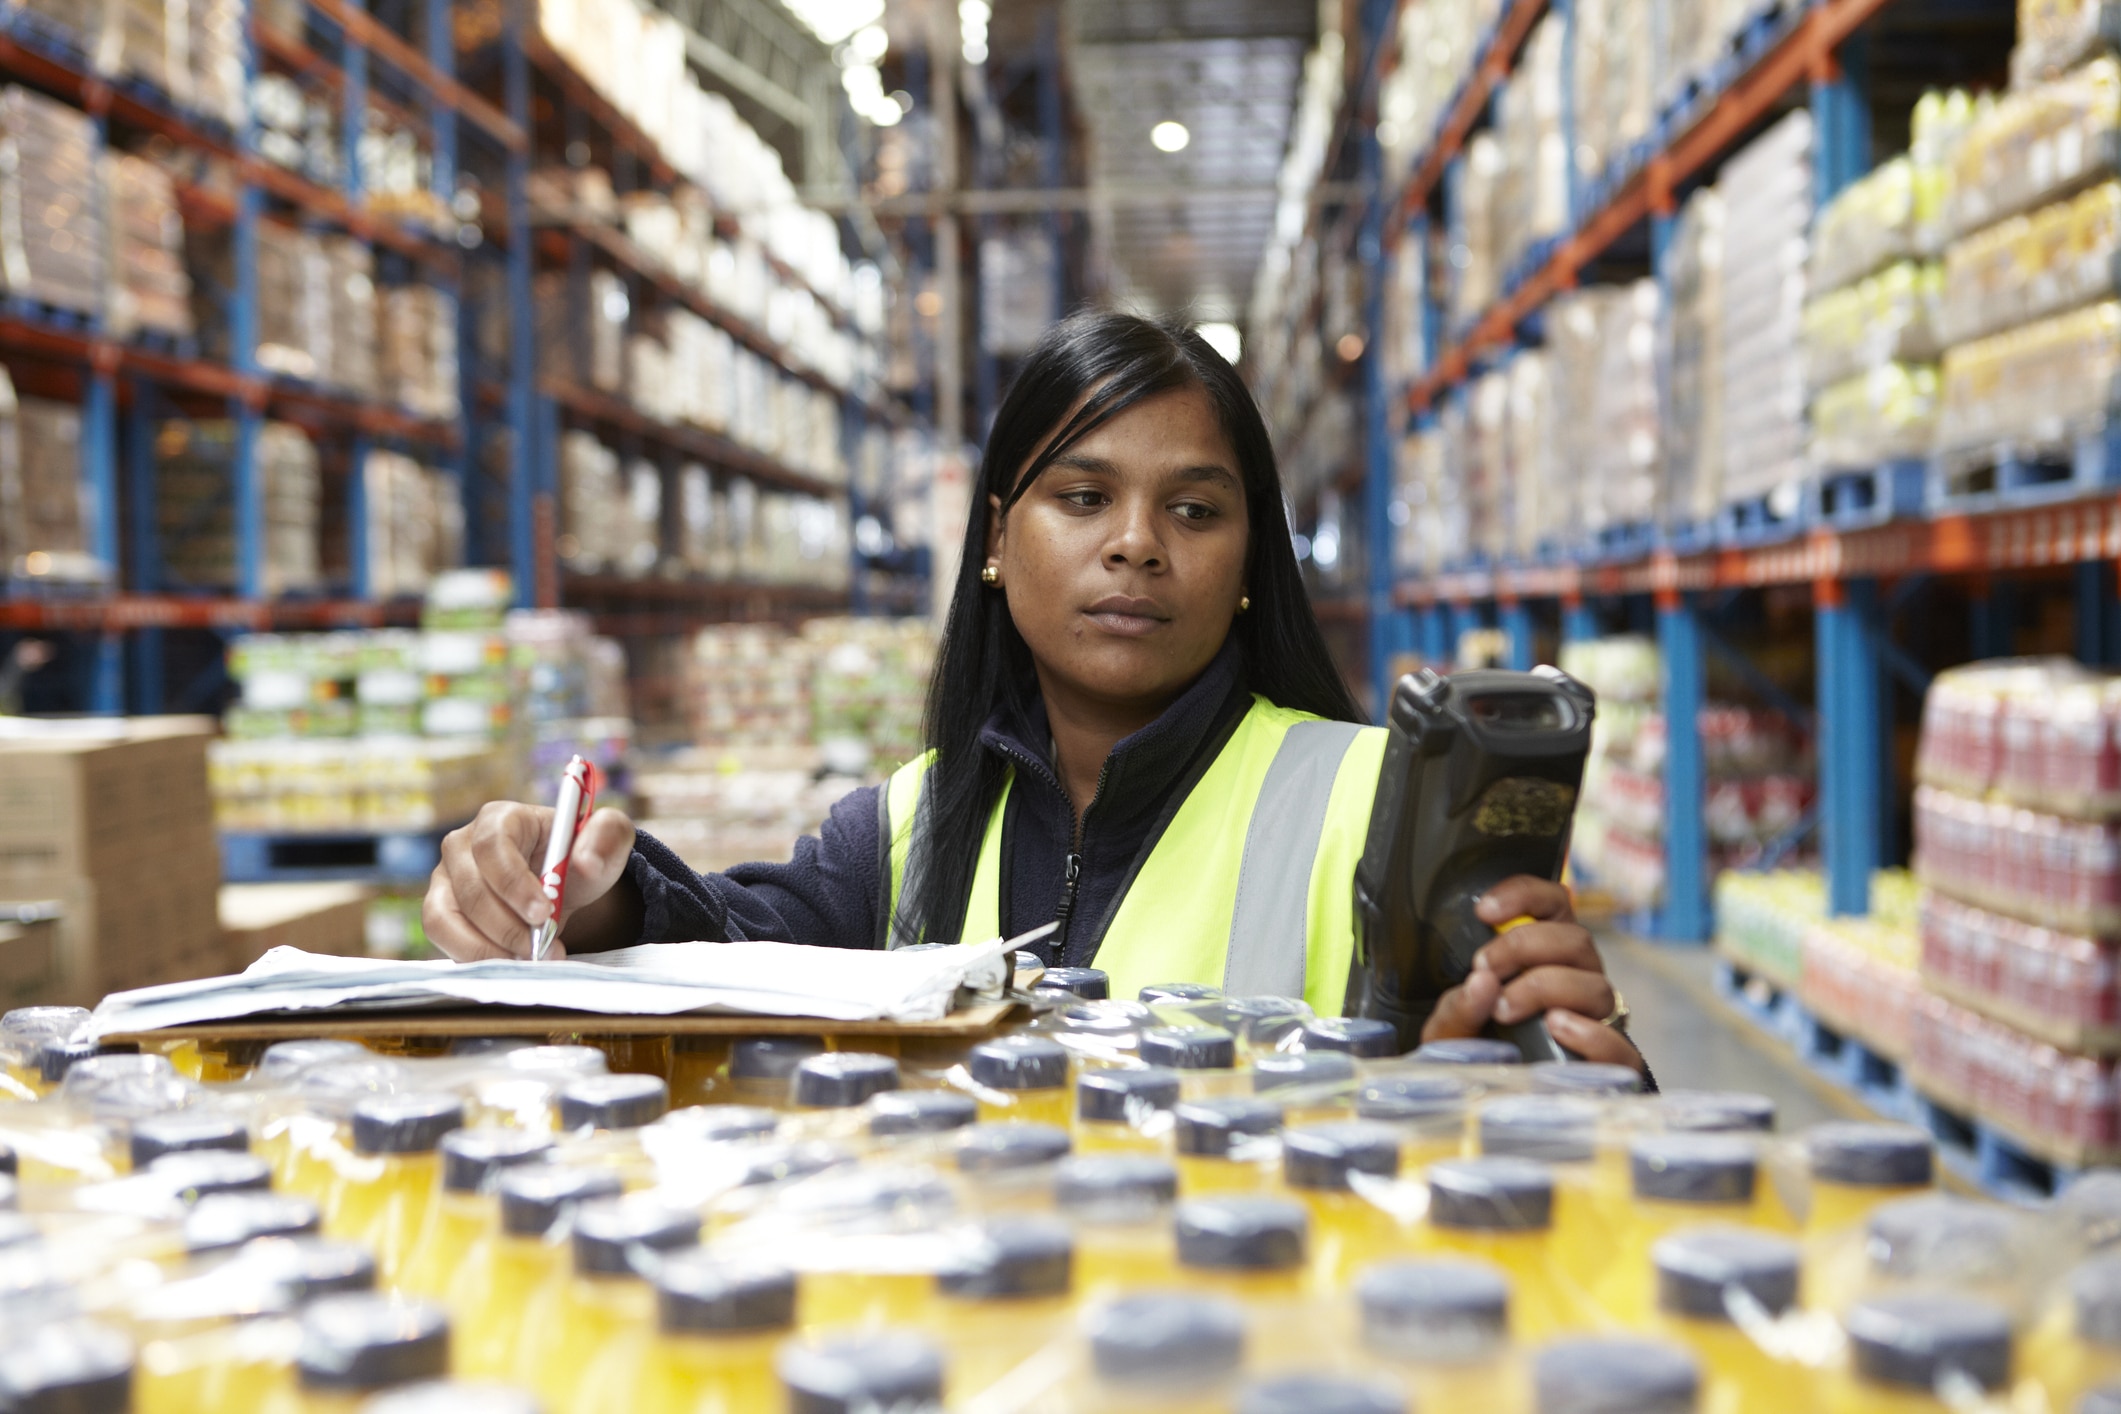 SAP Business One® Provides a Platform for Continued Business Growth for Finsbury Trading Limited